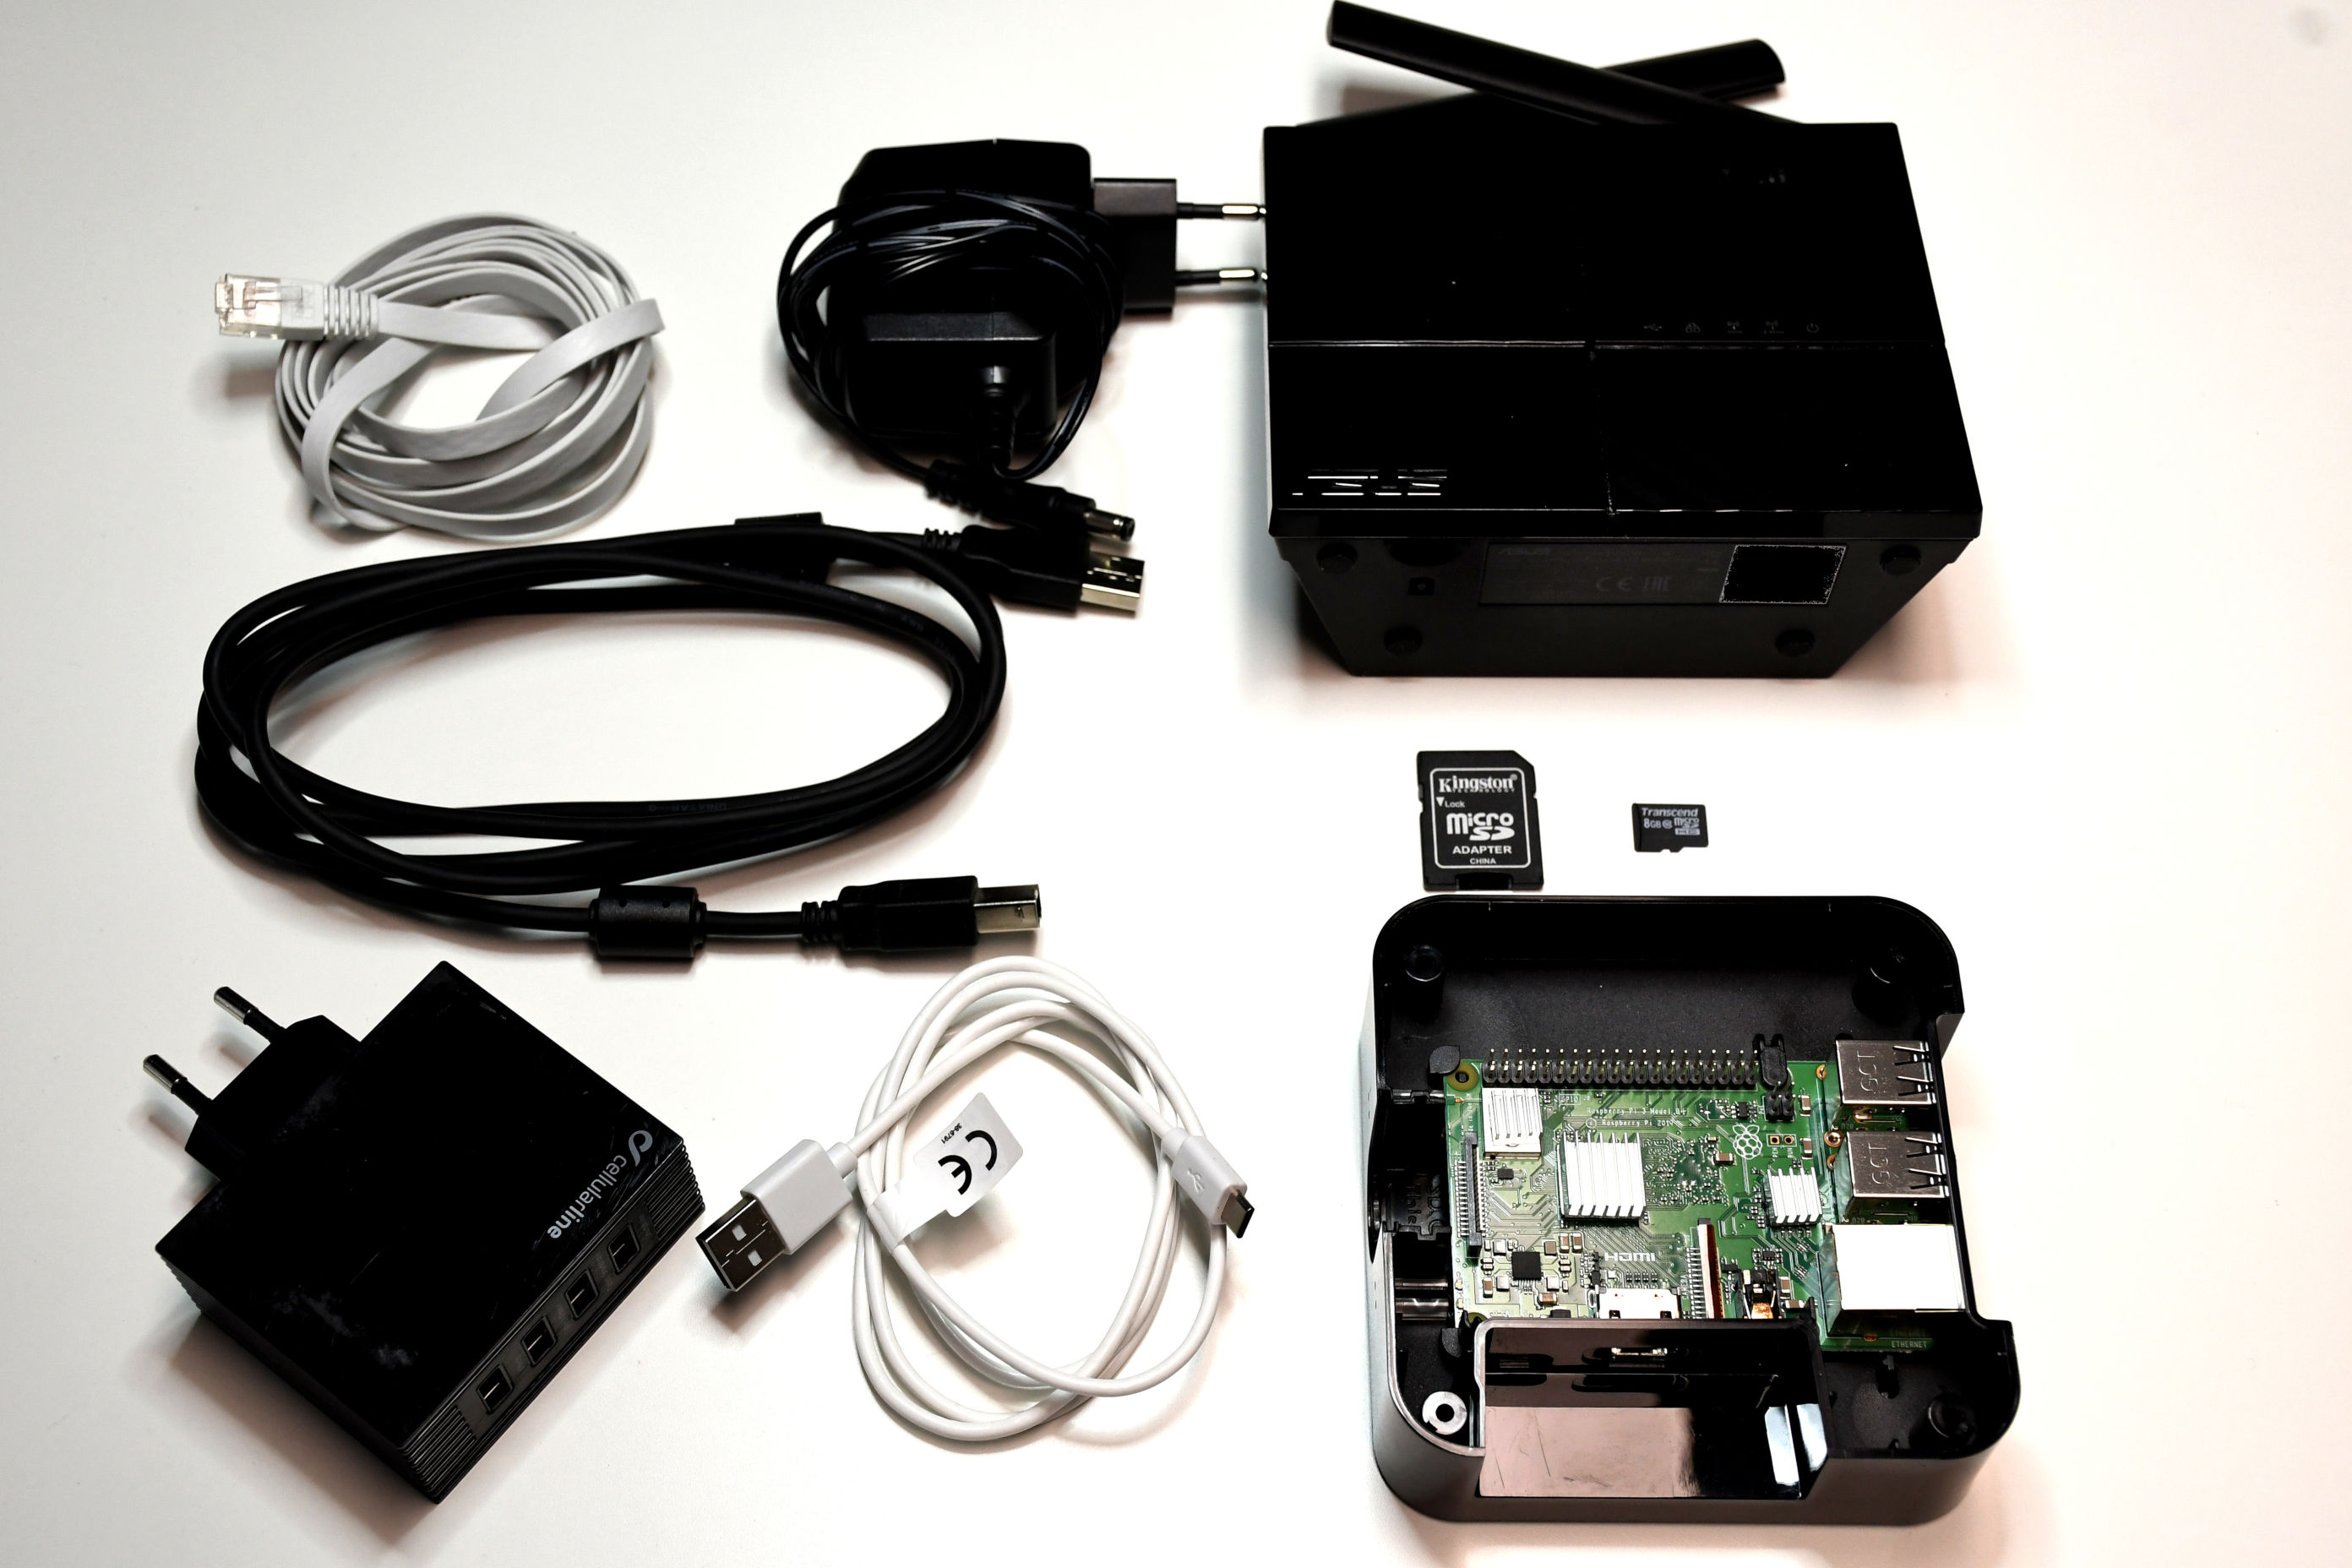 An example photo of required hardware components for Web Radio Control